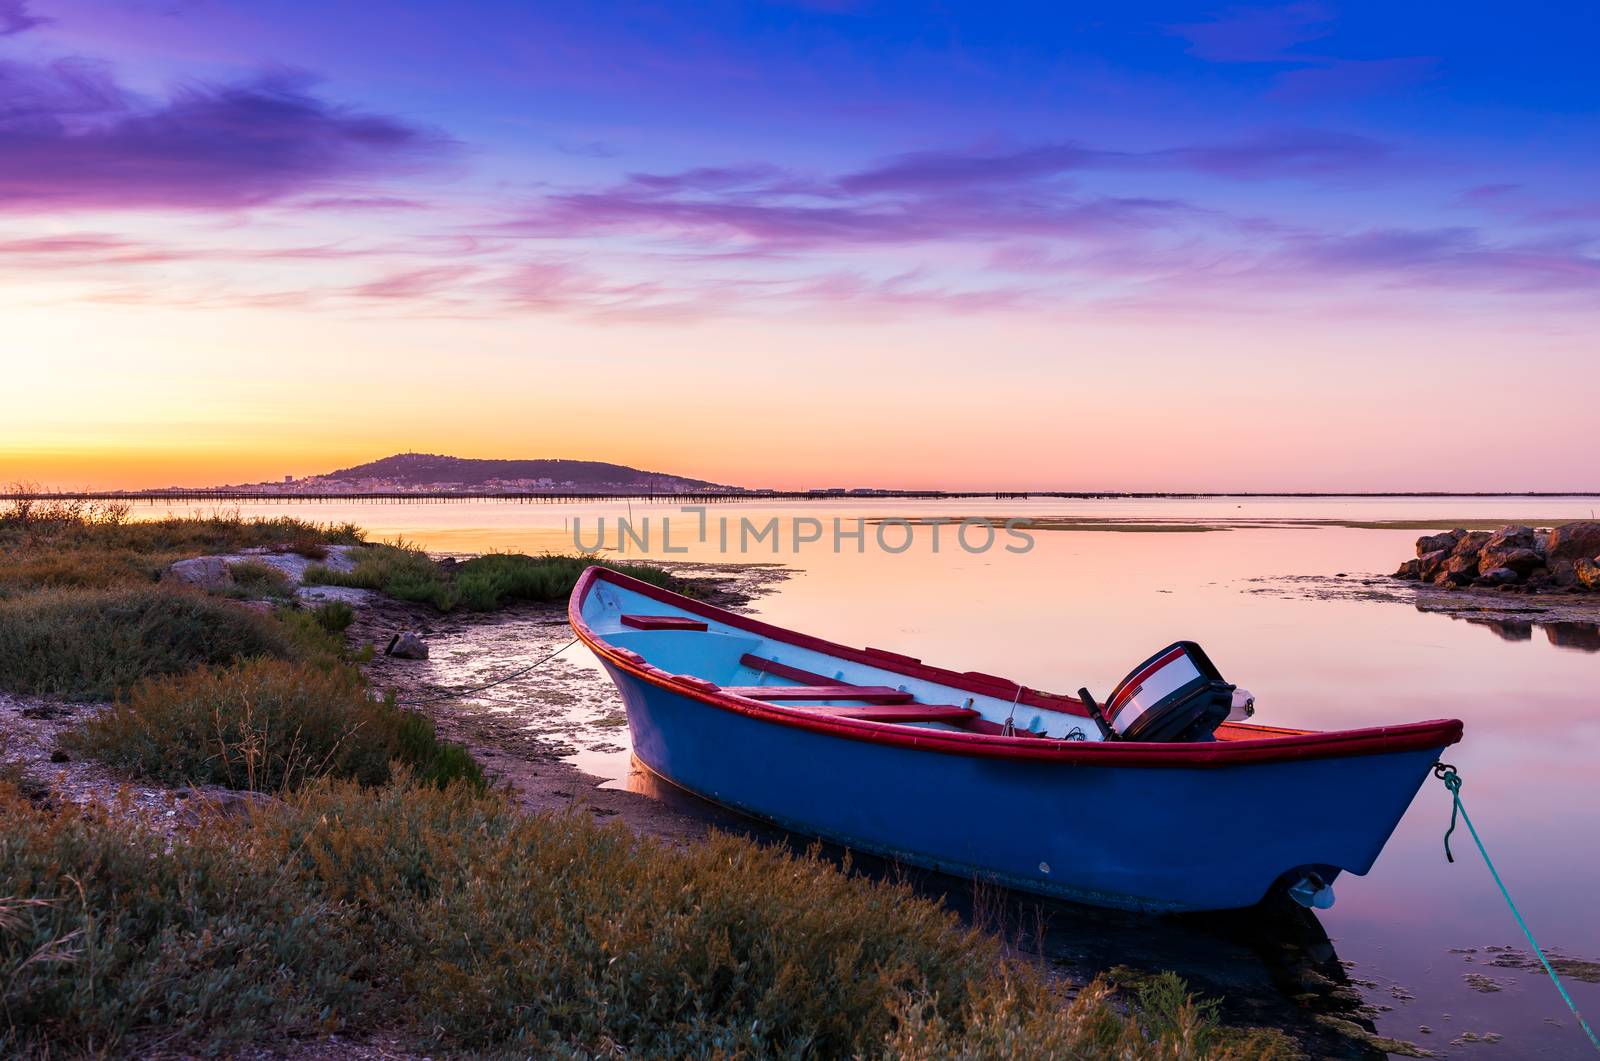 The Etang de Thau is a lagoon separated from the Gulf of Lion by a sandy coastline connecting the Agde volcano and the hill of Sète Mont Saint-Clair.